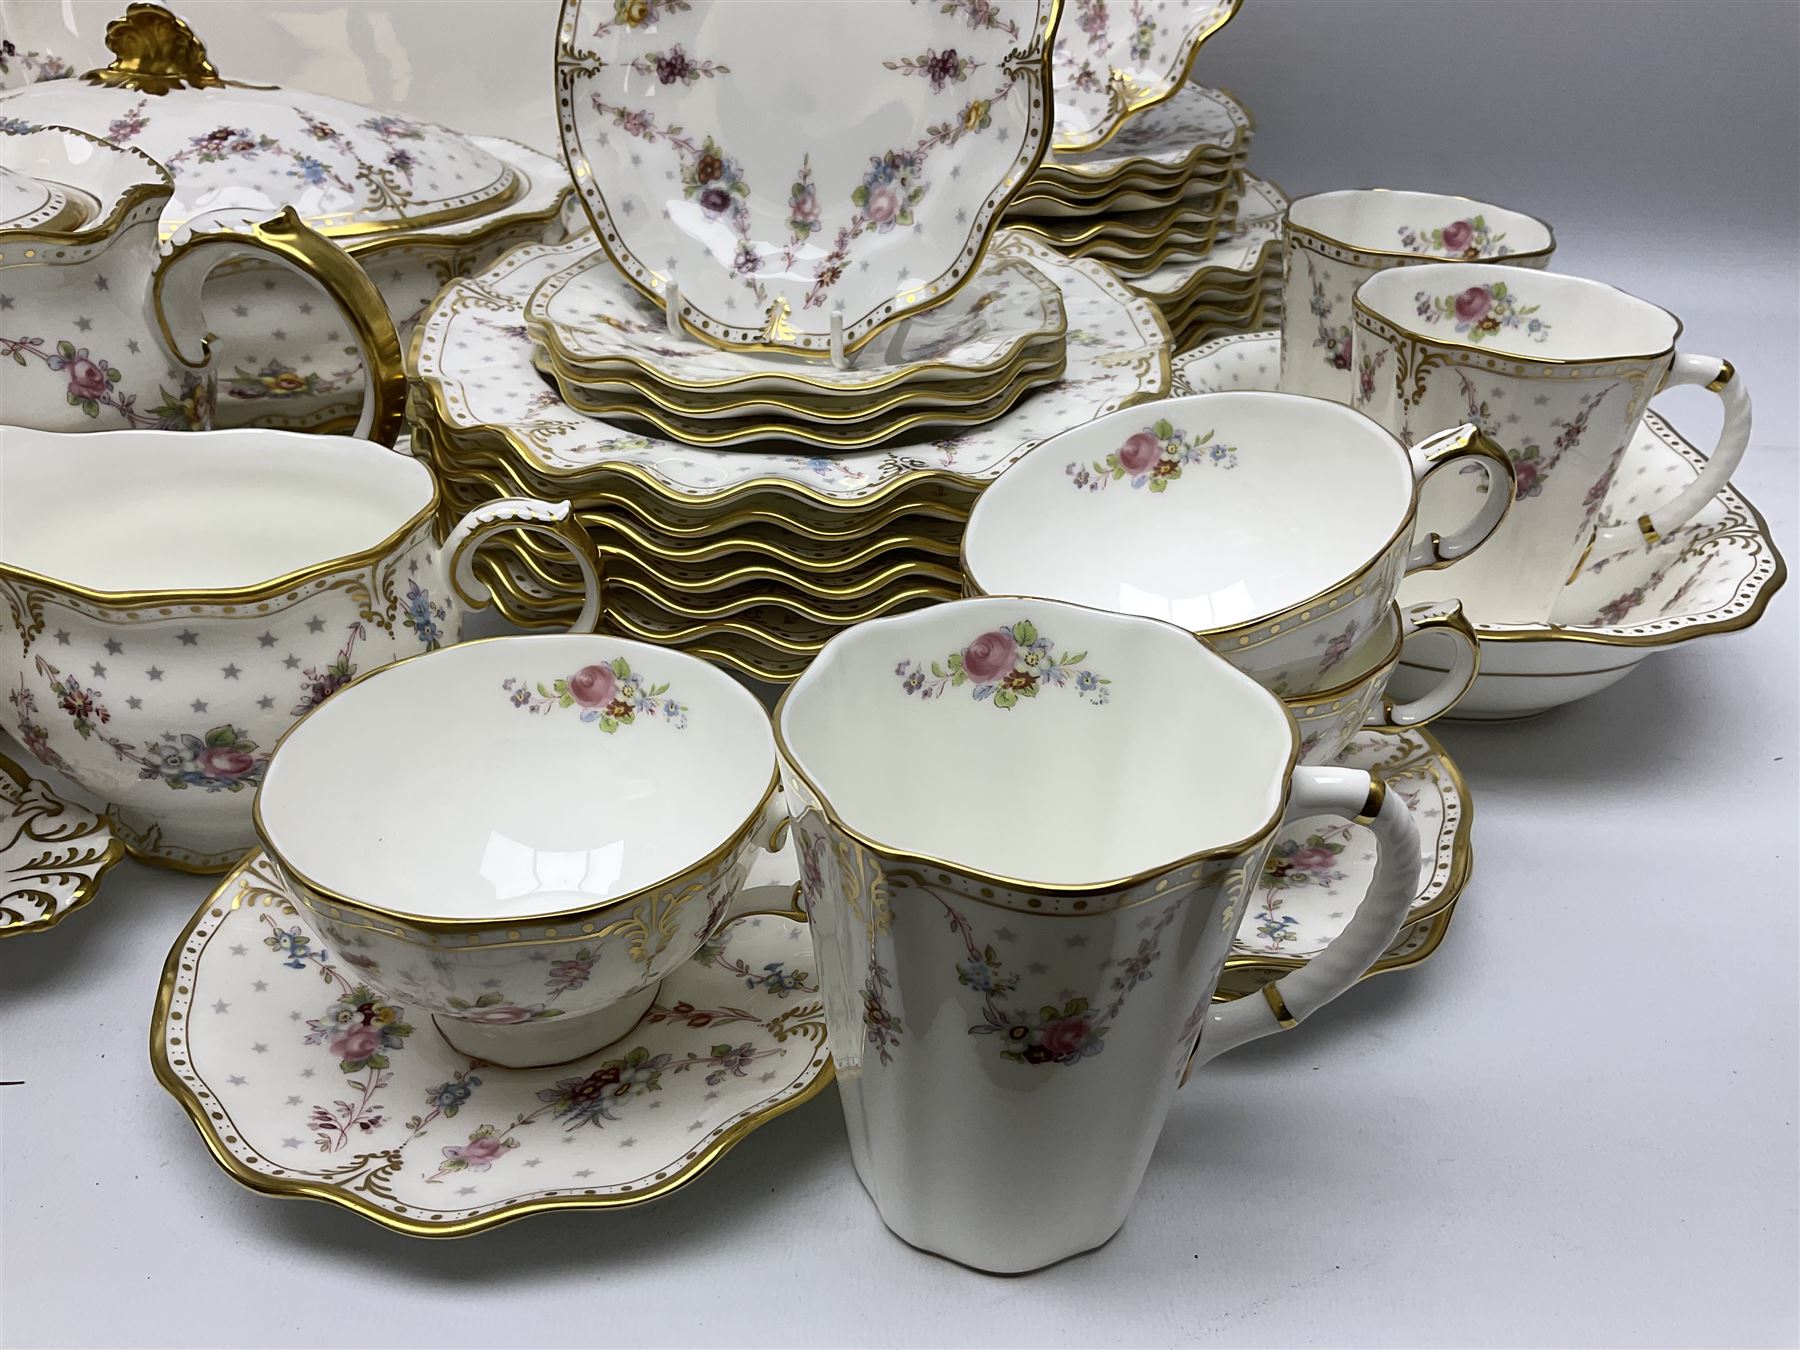 Modern Royal Crown Derby part tea and dinner service - Image 6 of 11